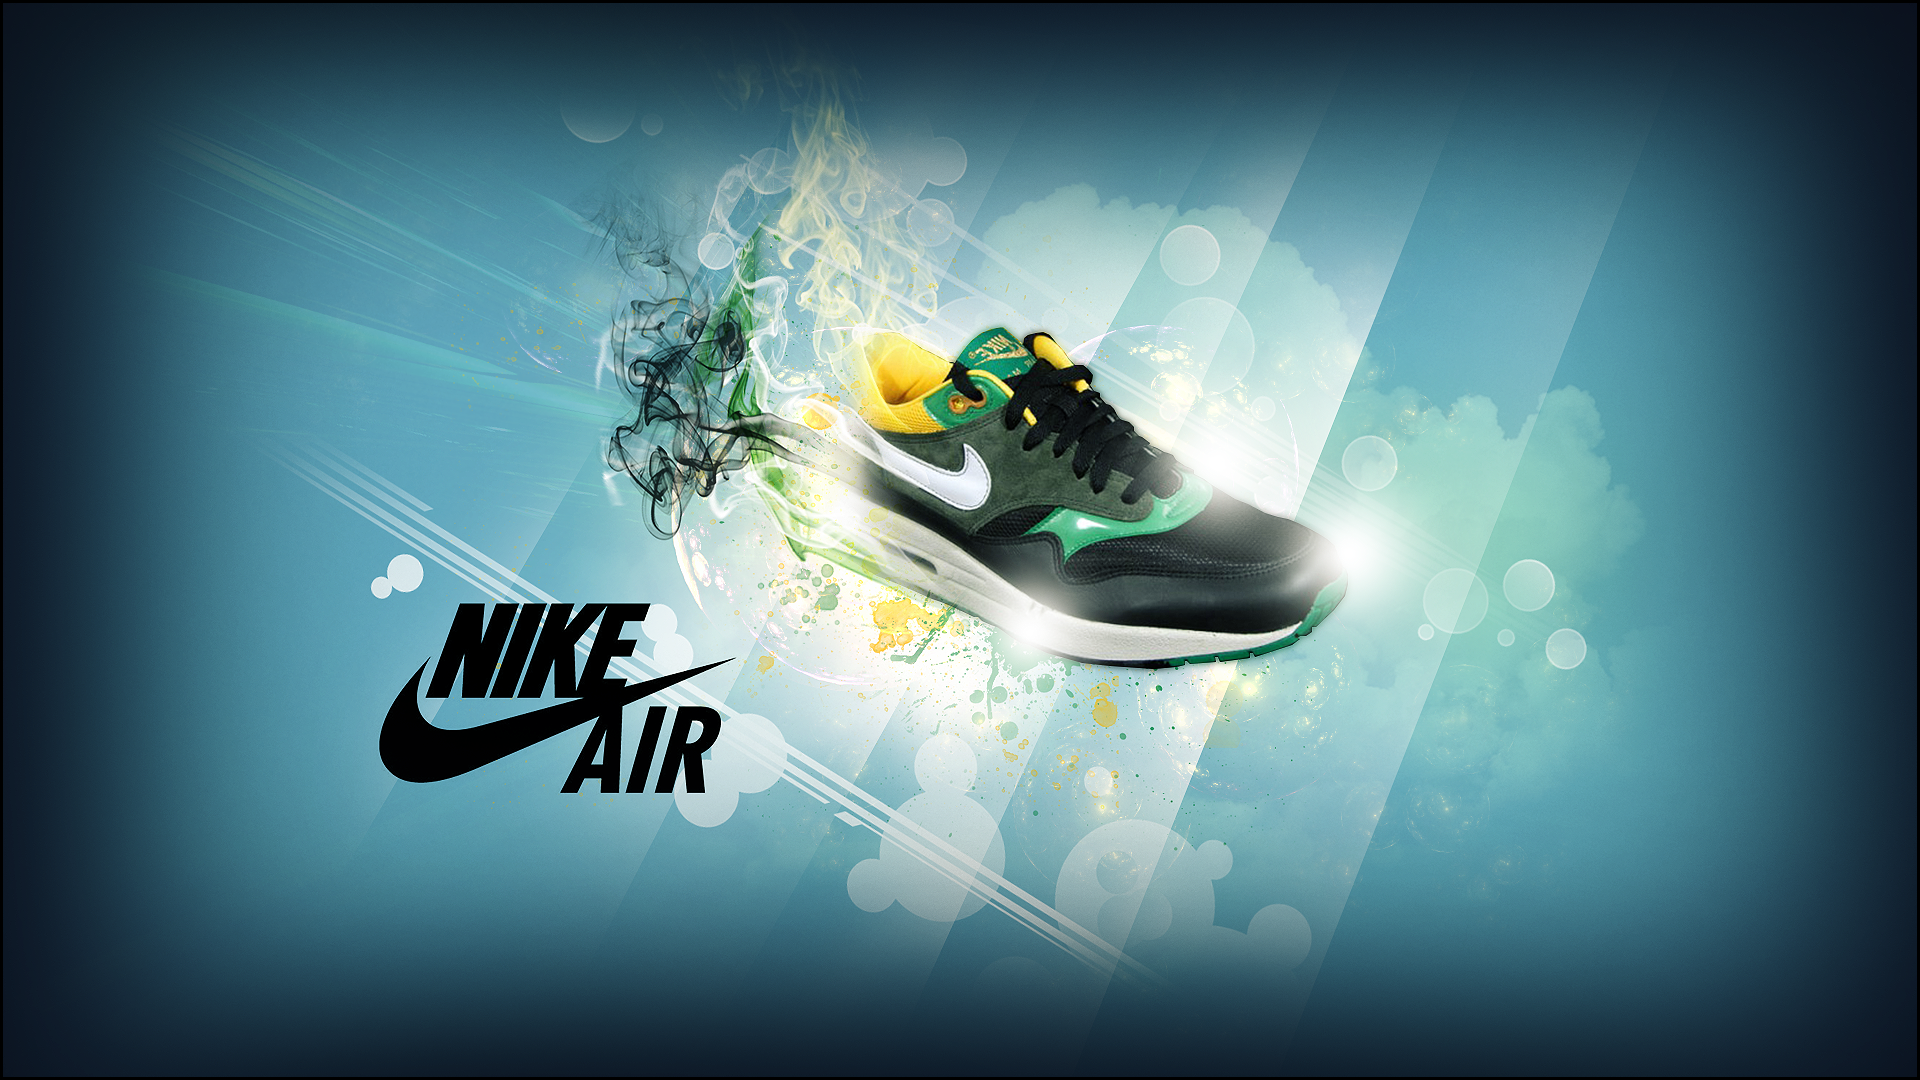 Nike Air Max 1 Wallpaper by Ghost 3 on